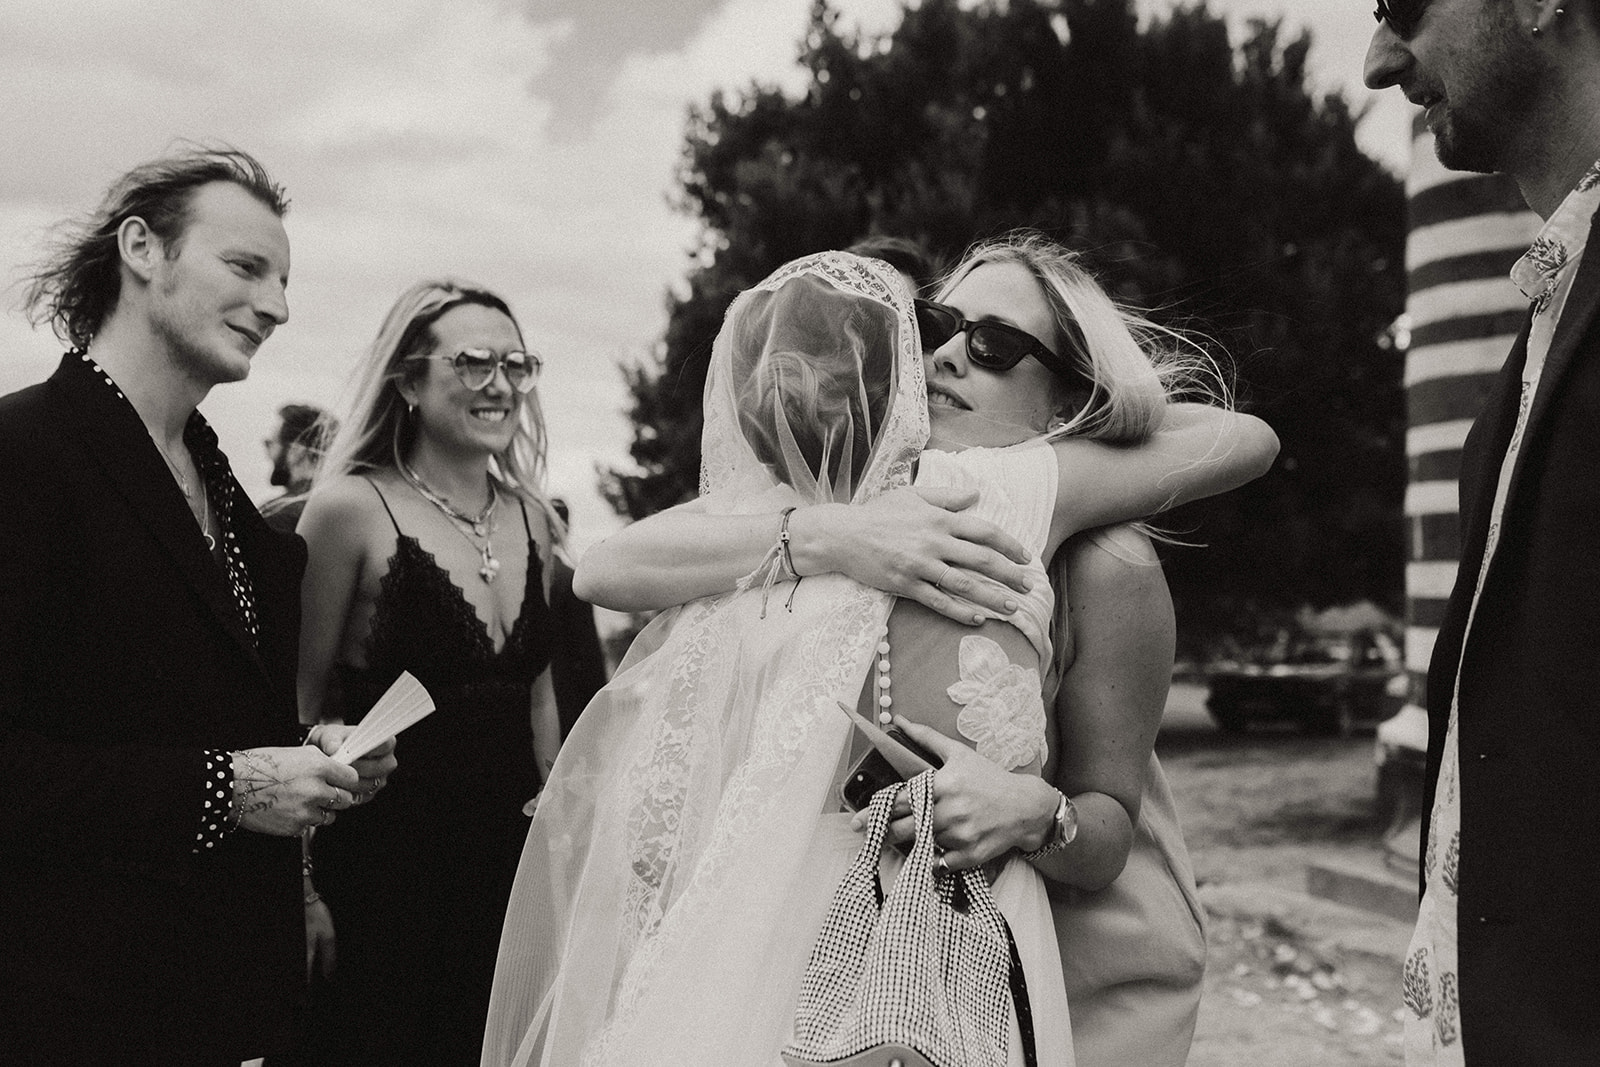 Black and white timeless photograph of a bride hugging a friend on her wedding day in Corsica